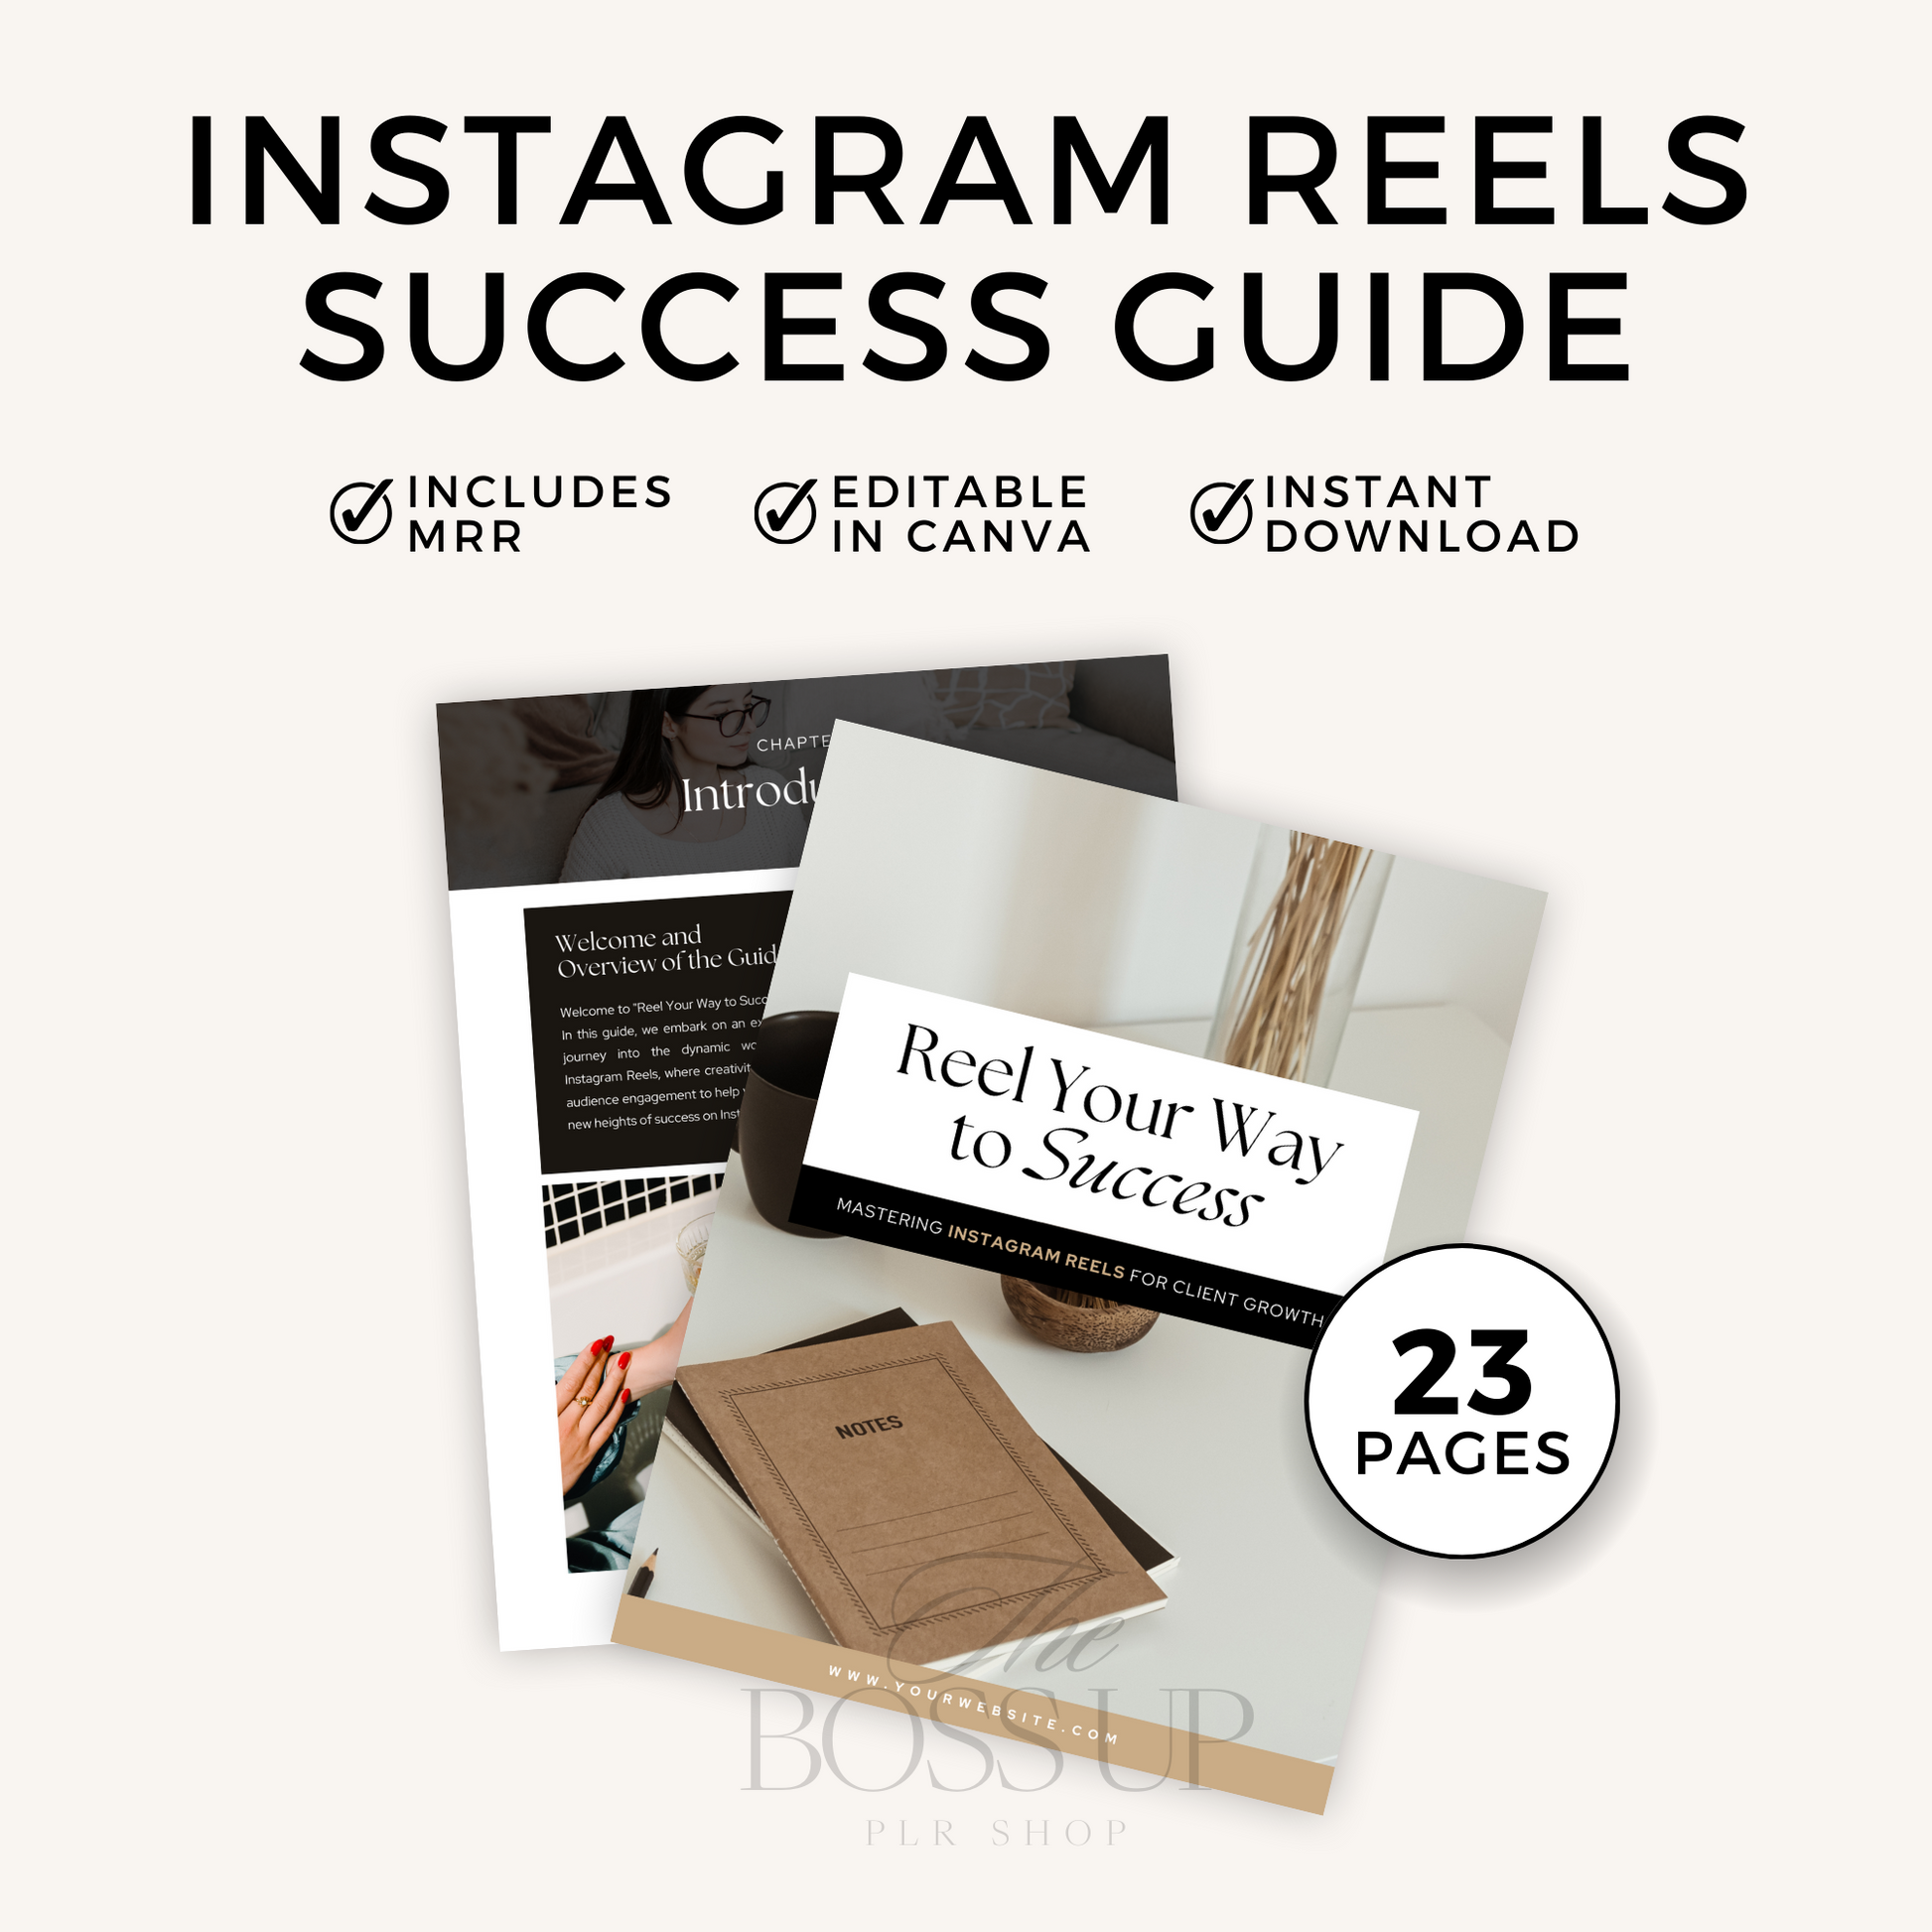 Instagram Reels for Growth Guide (MRR) – The BossUp PLR Shop